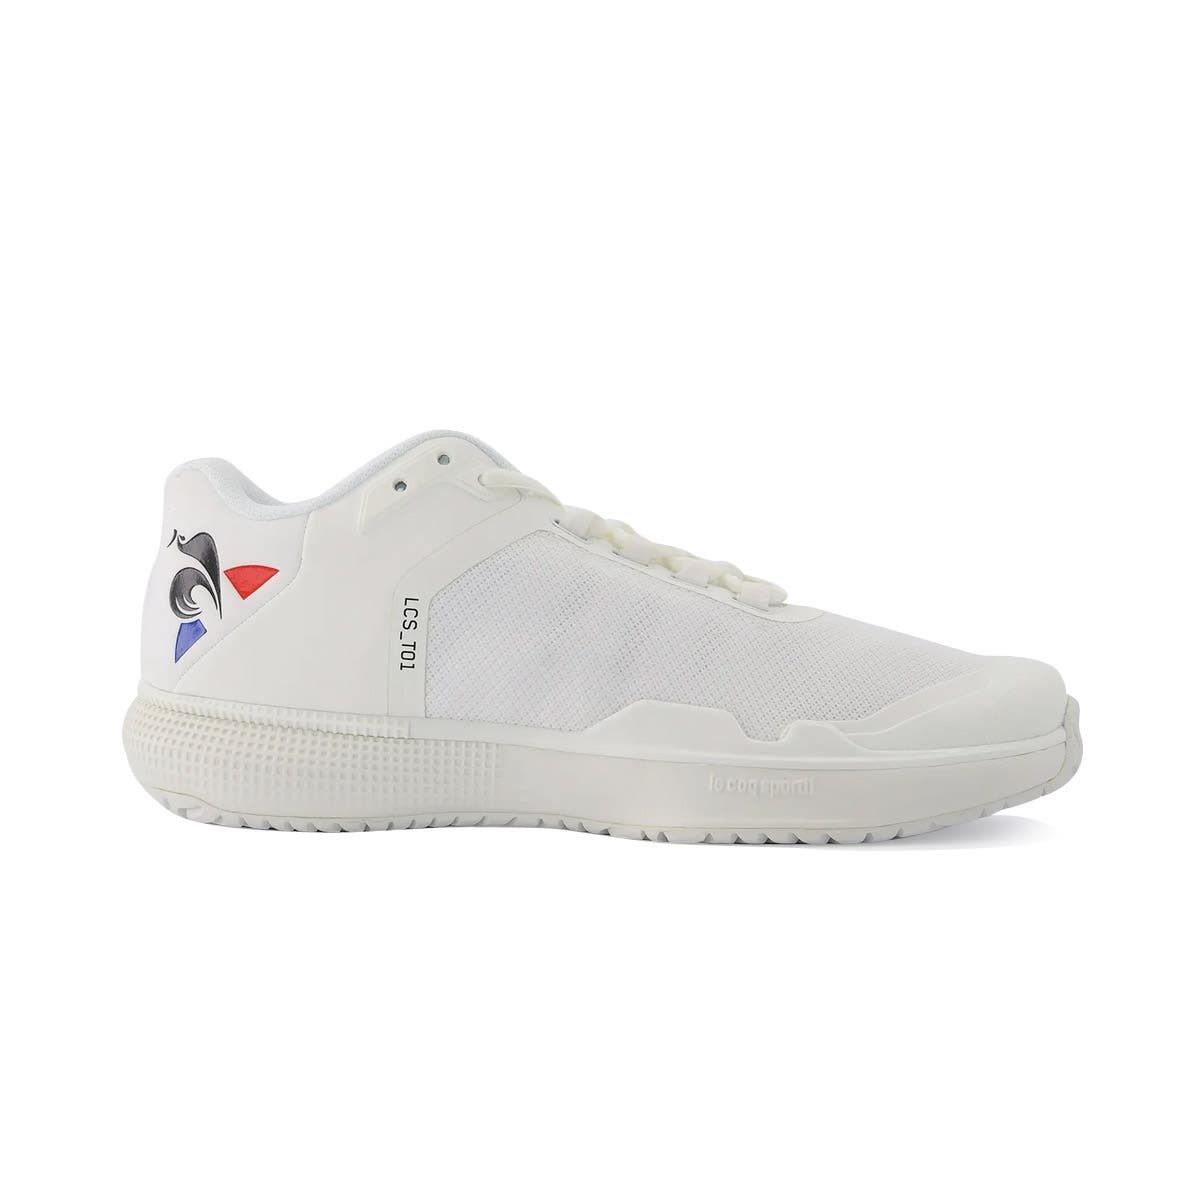 WHITE FUTUR LCS T01 ALL COURT 2210976 SHOES